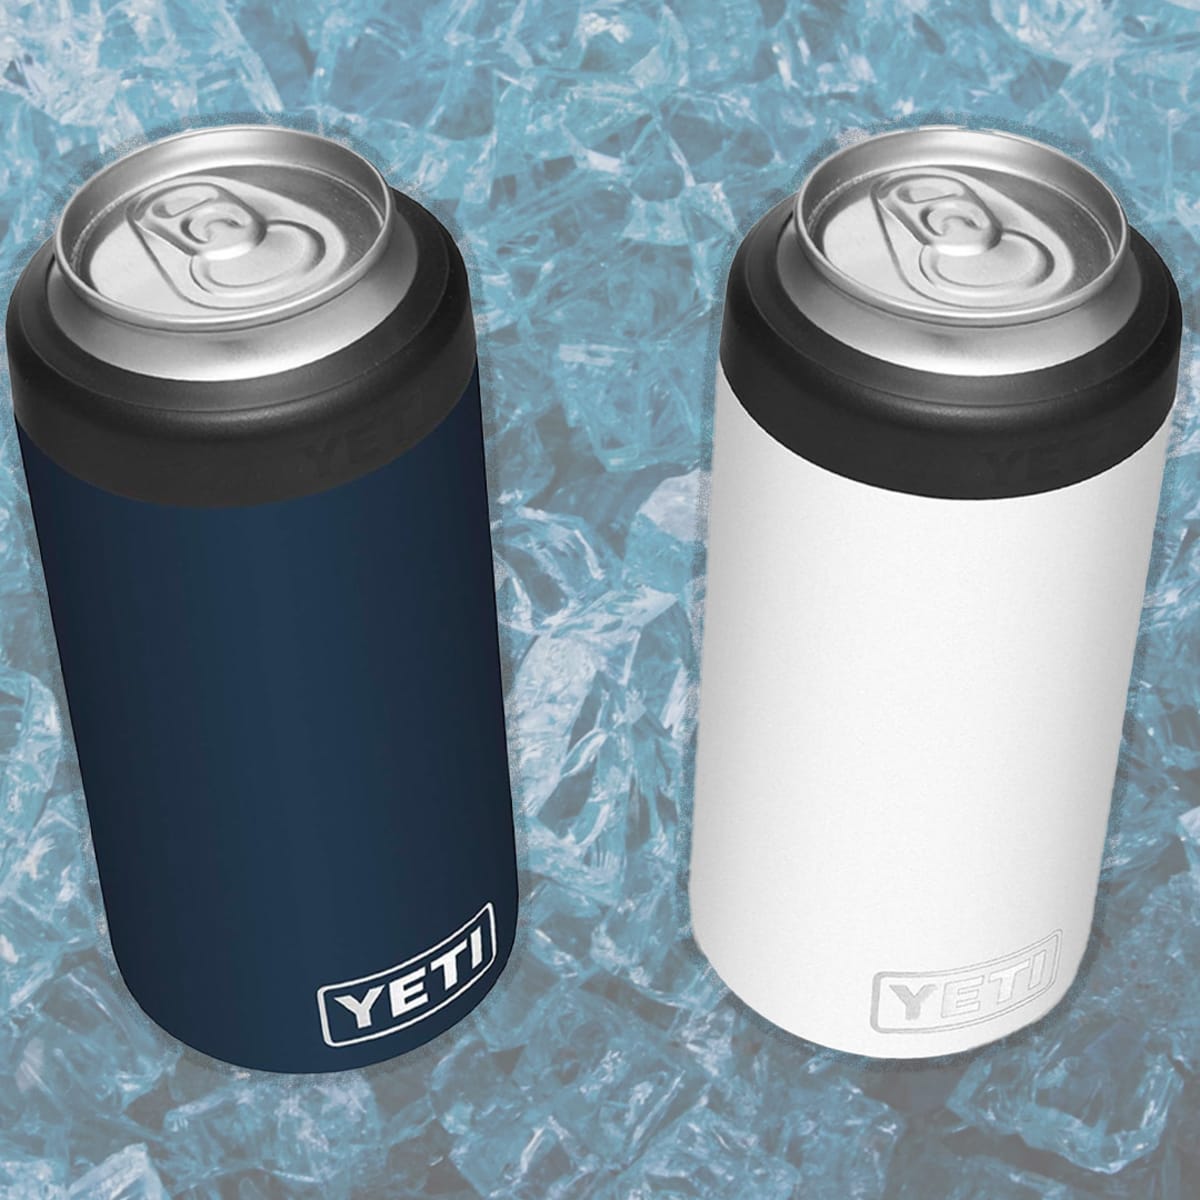 YETI Rambler 16-oz Stainless Steel Colster Tall Can Insulator